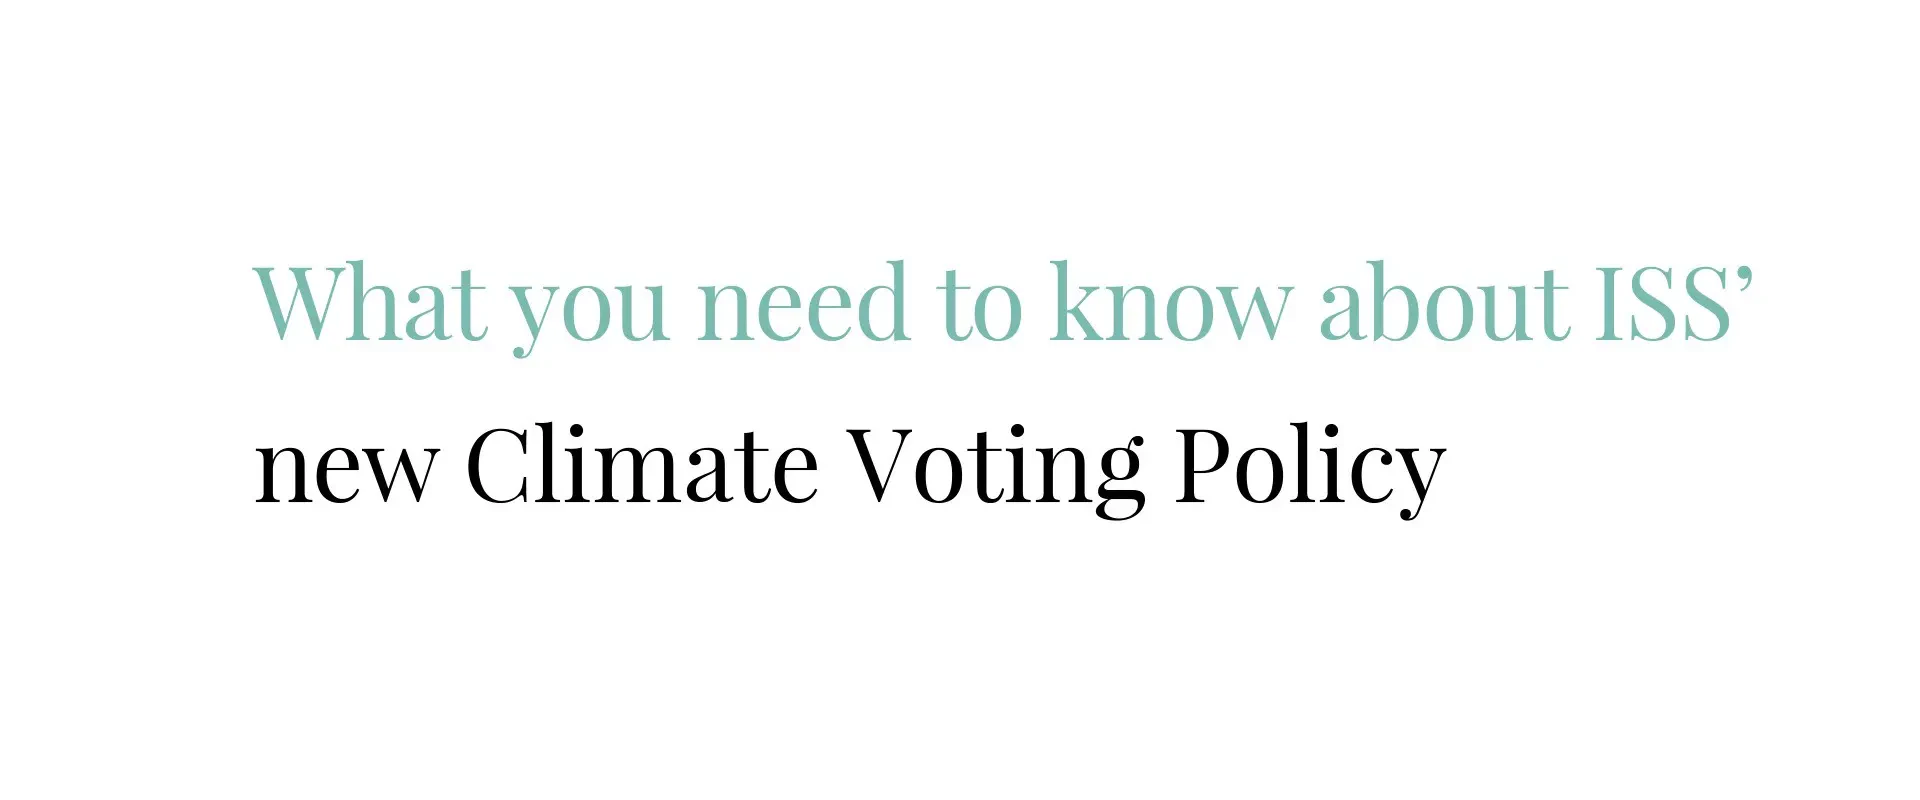 WHAT YOU NEED TO KNOW ABOUT ISS’ NEW CLIMATE VOTING POLICY